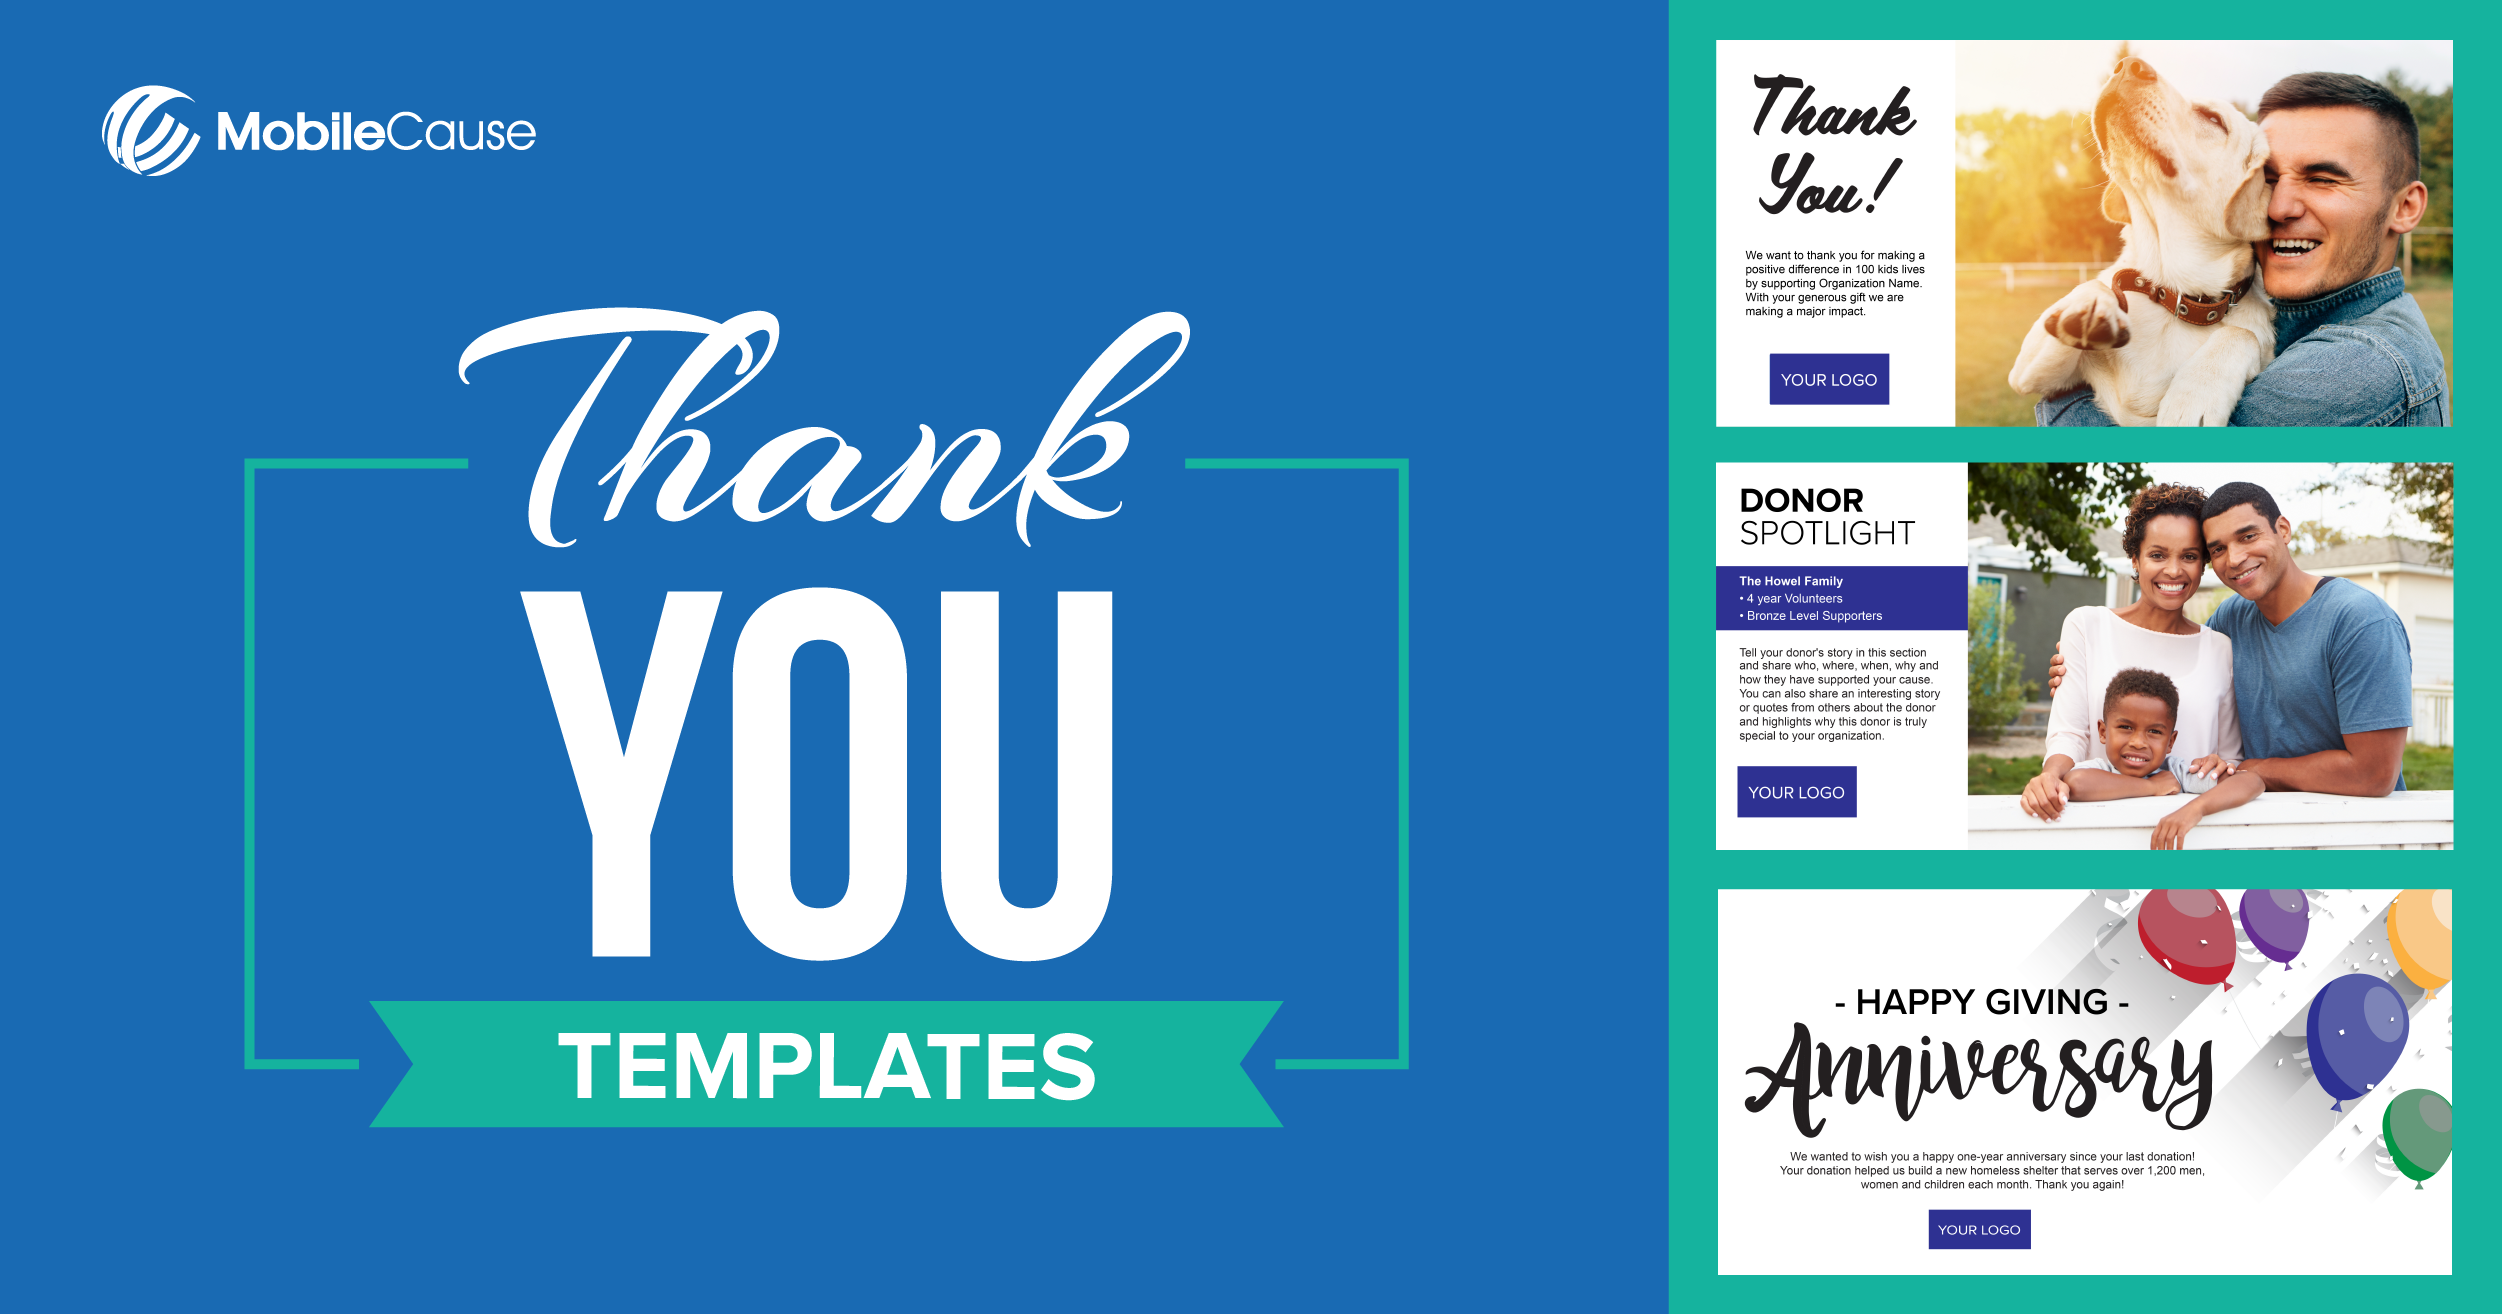 The Art of Saying Thank You: Ideas for Freelancers - Marketing